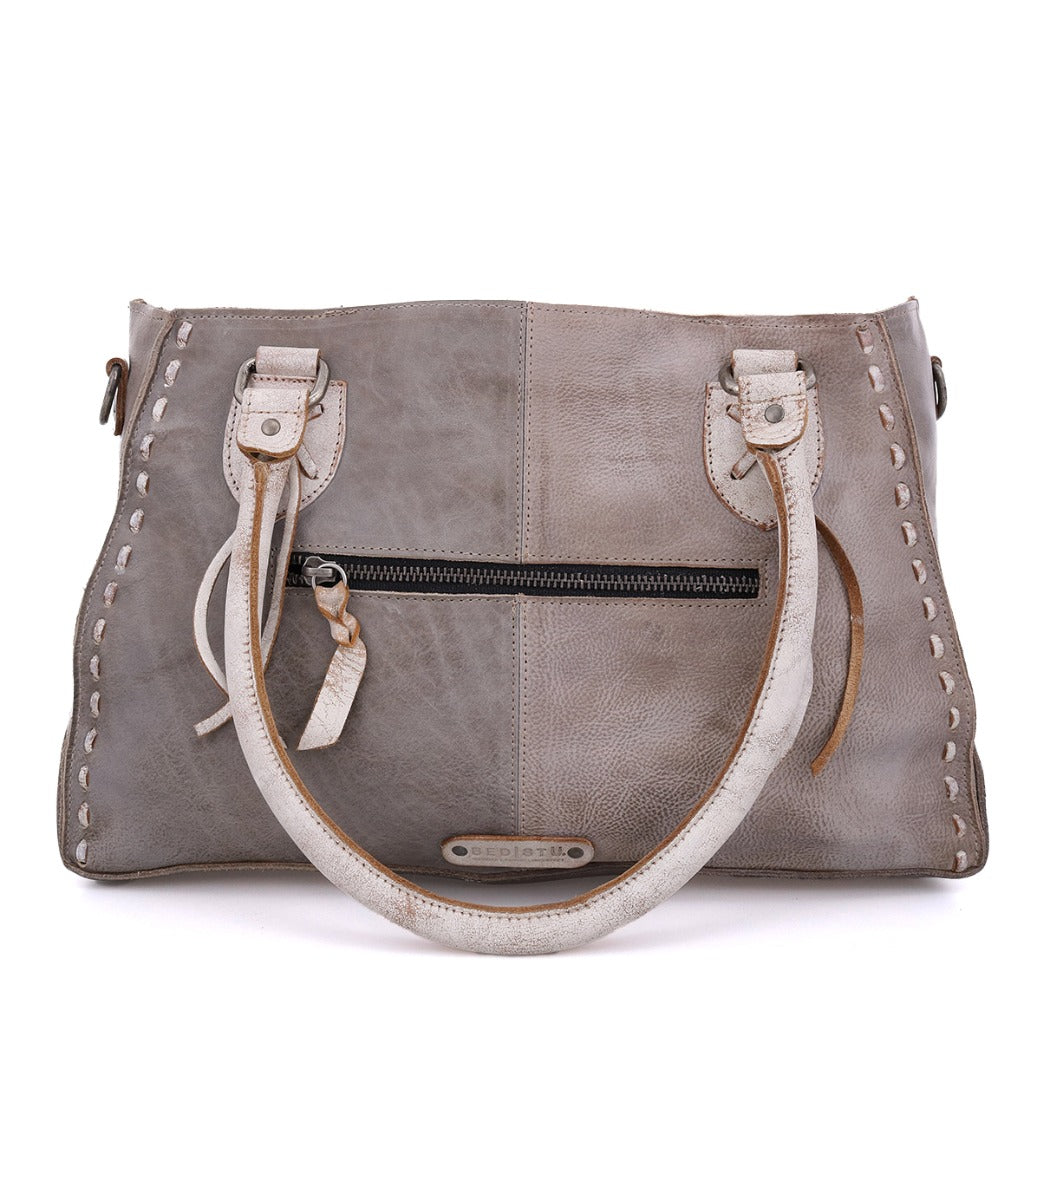 A Rockababy leather handbag by Bed Stu with a zipper.